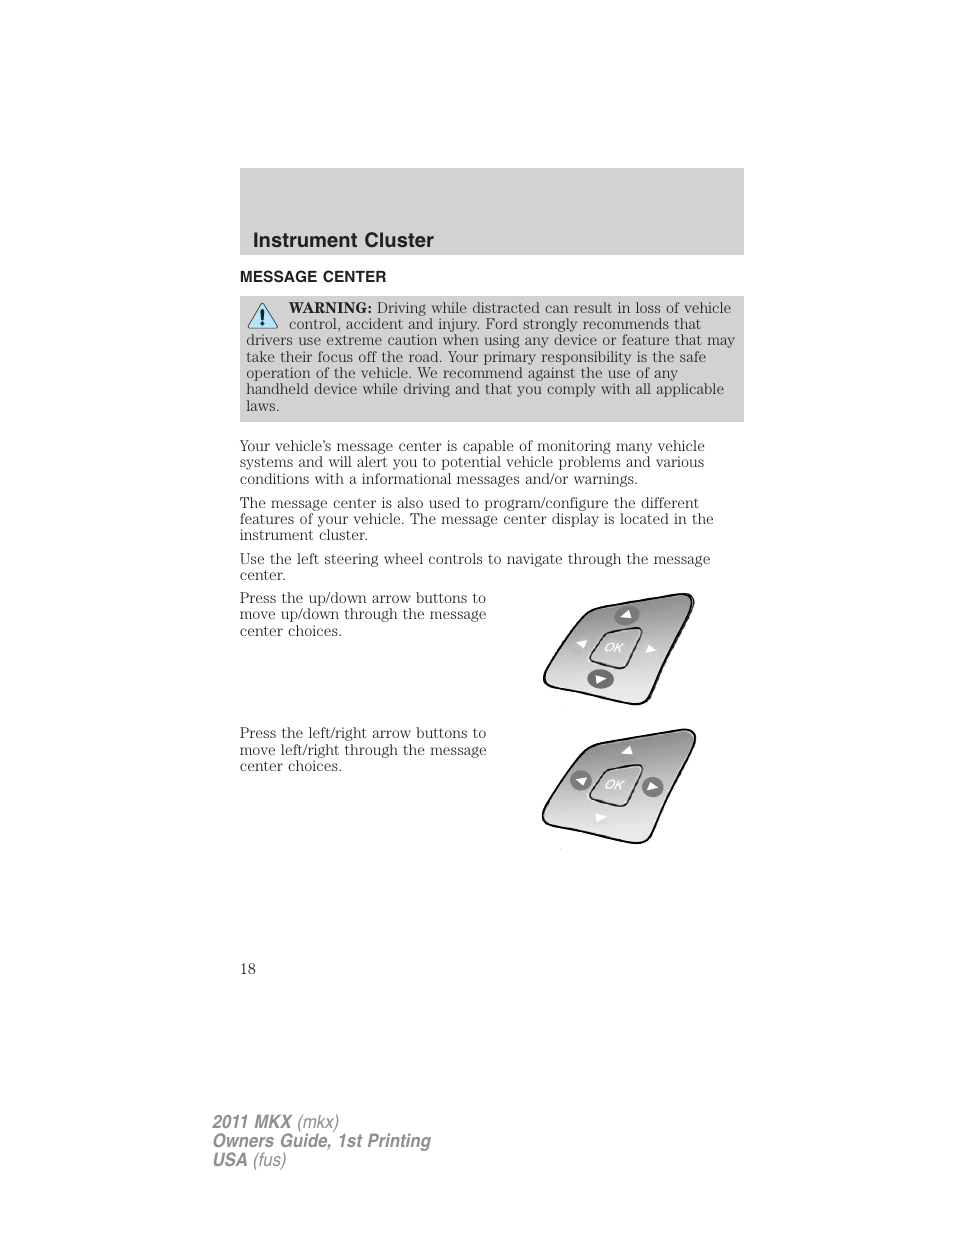 Message center, Instrument cluster | Lincoln 2011 MKX User Manual | Page 18 / 367